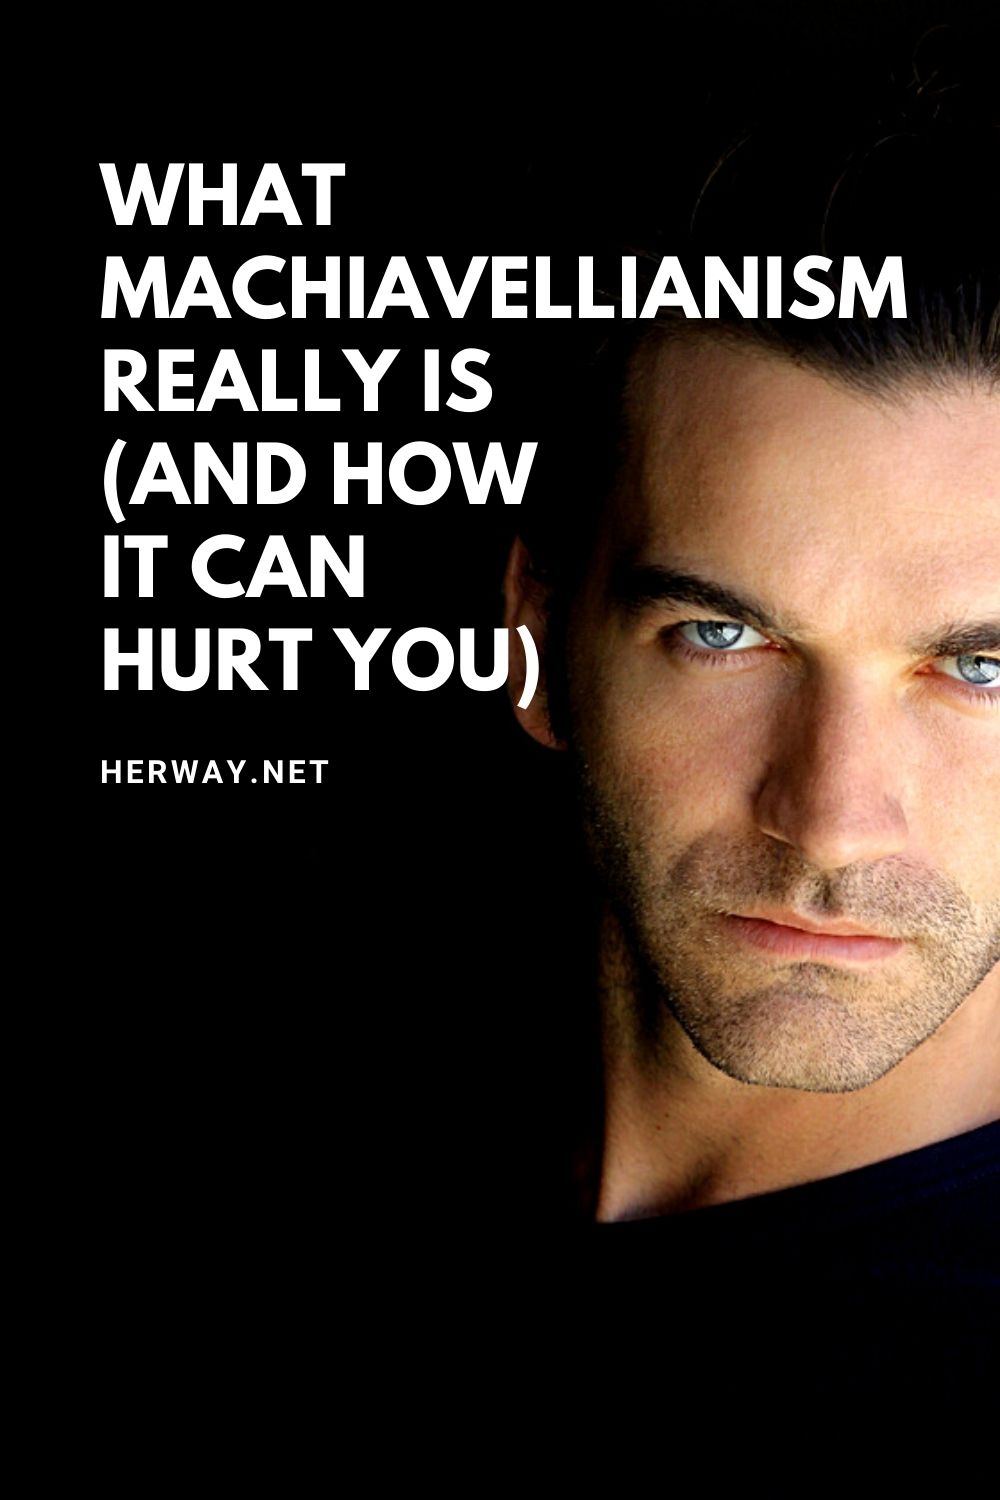 What Machiavellianism Really Is (And How It Can Hurt You)